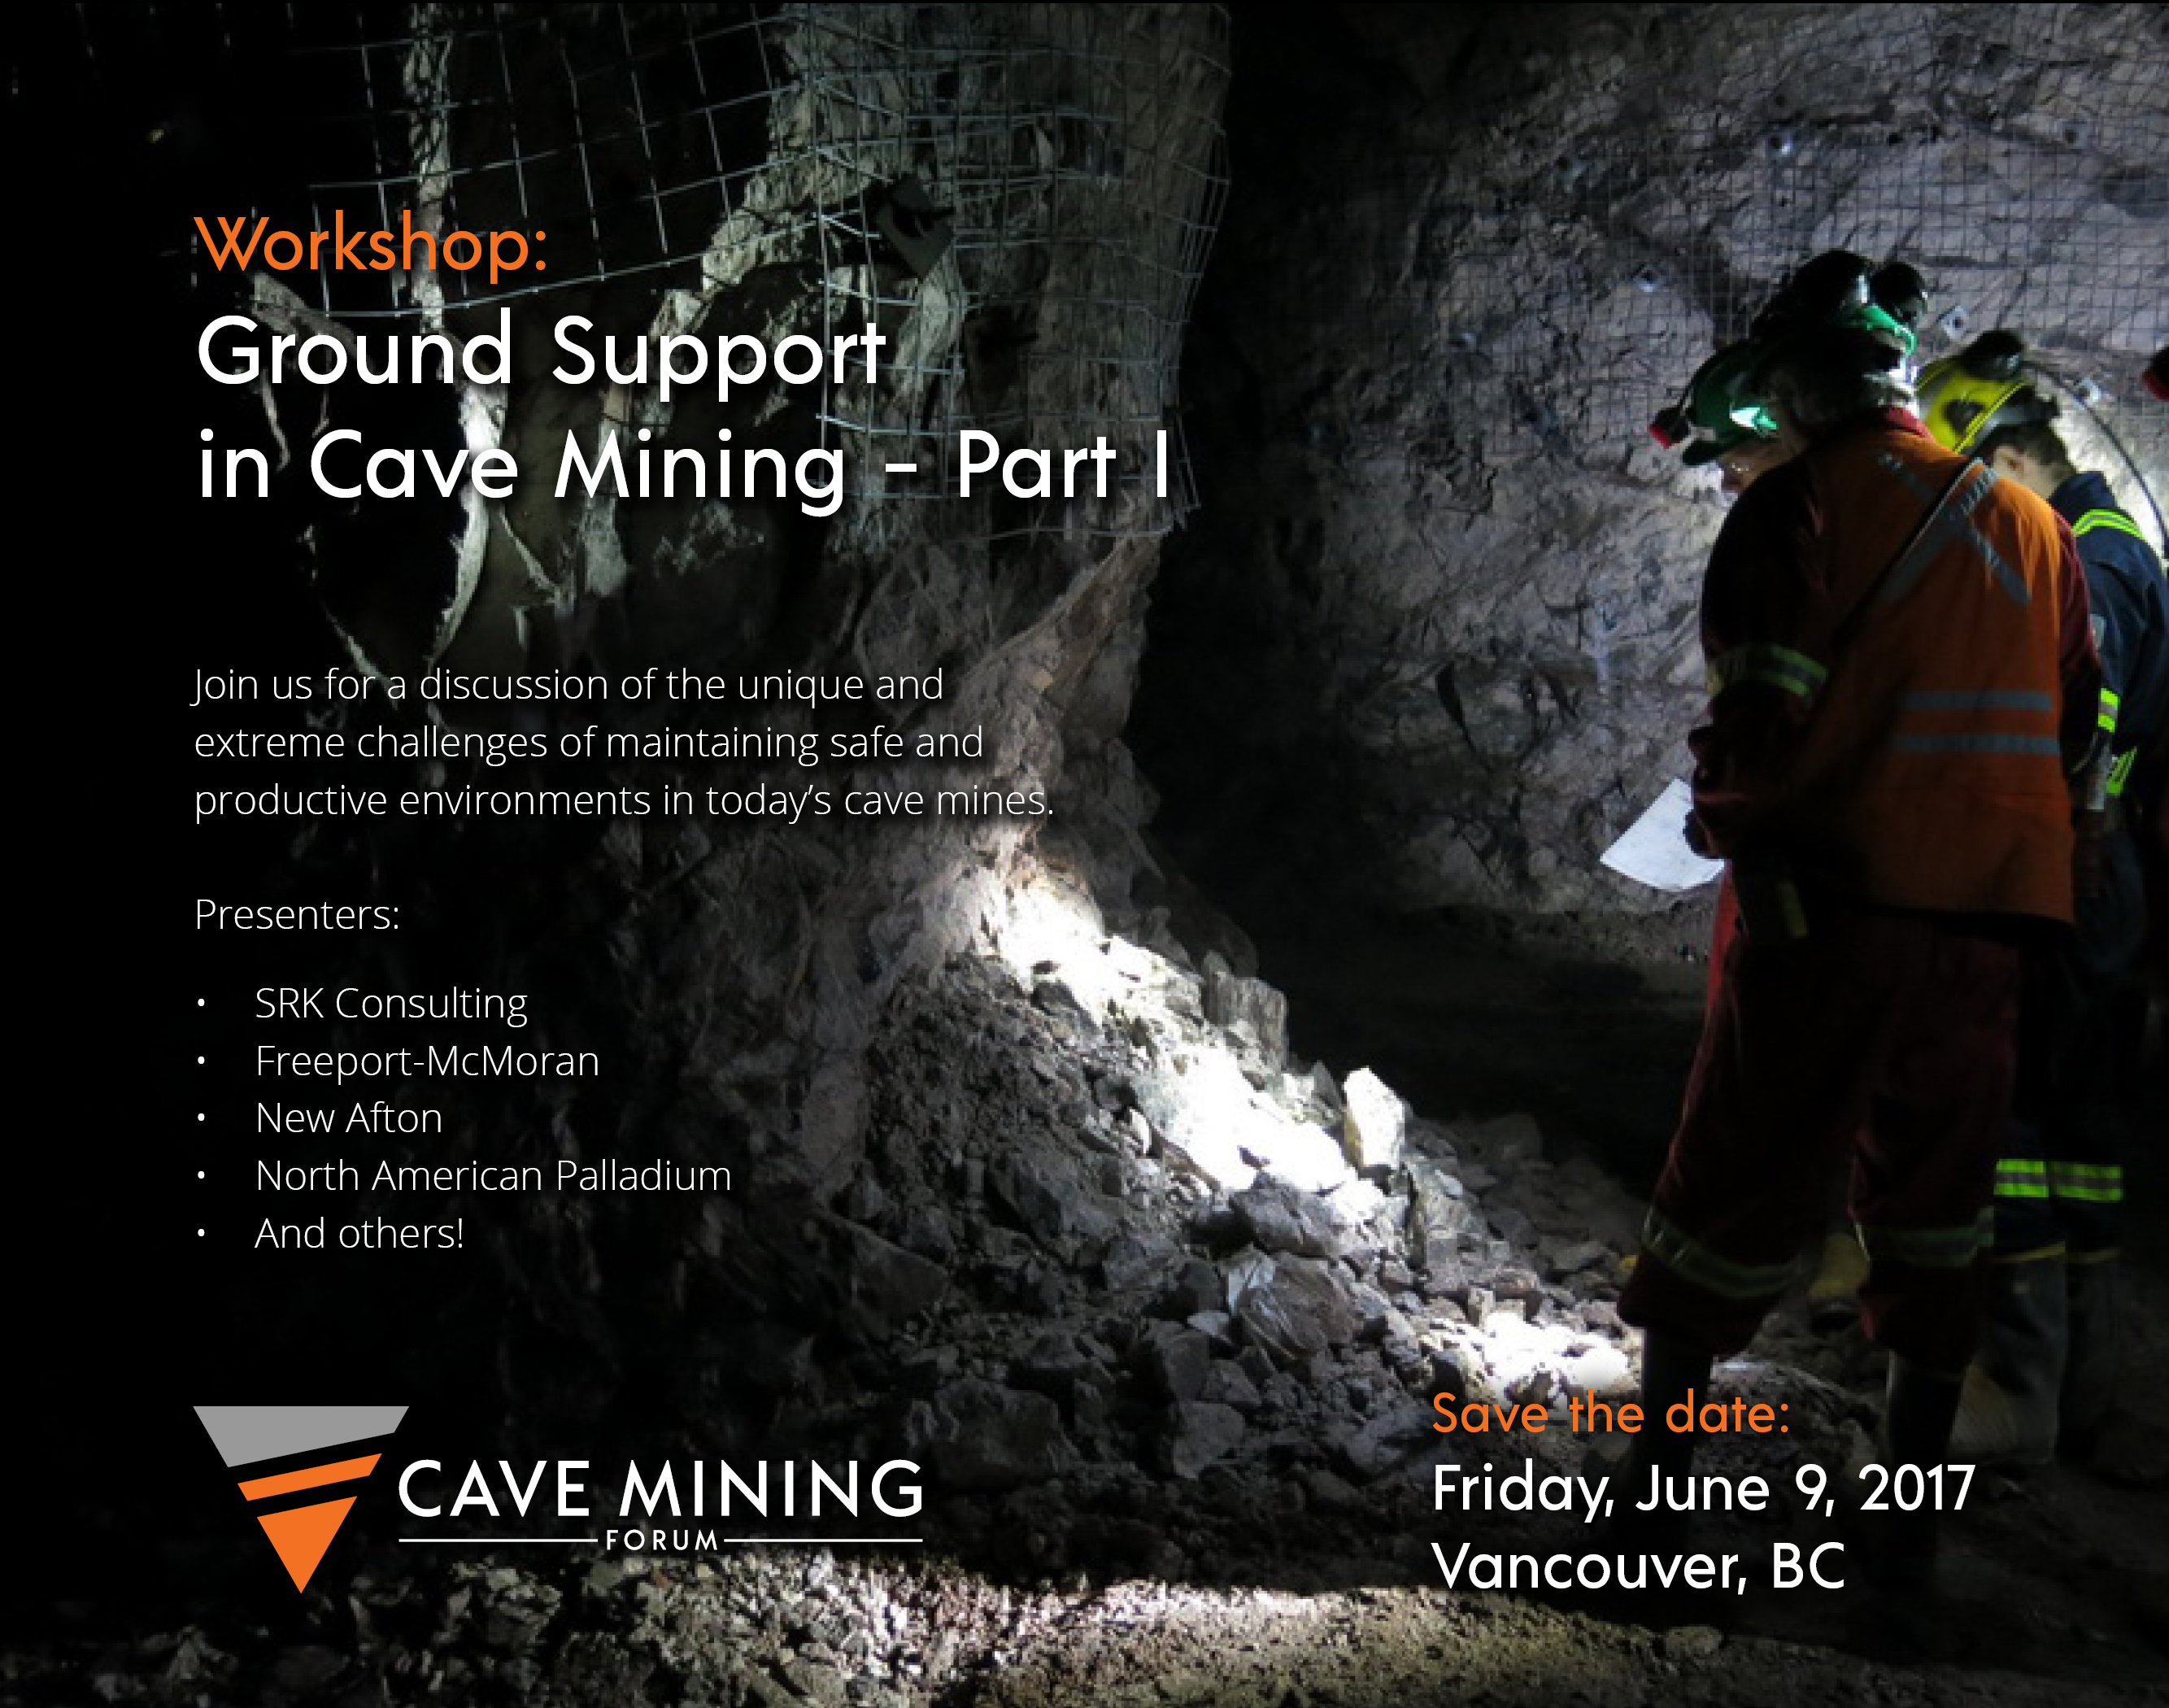 Ground Support in Cave Mining